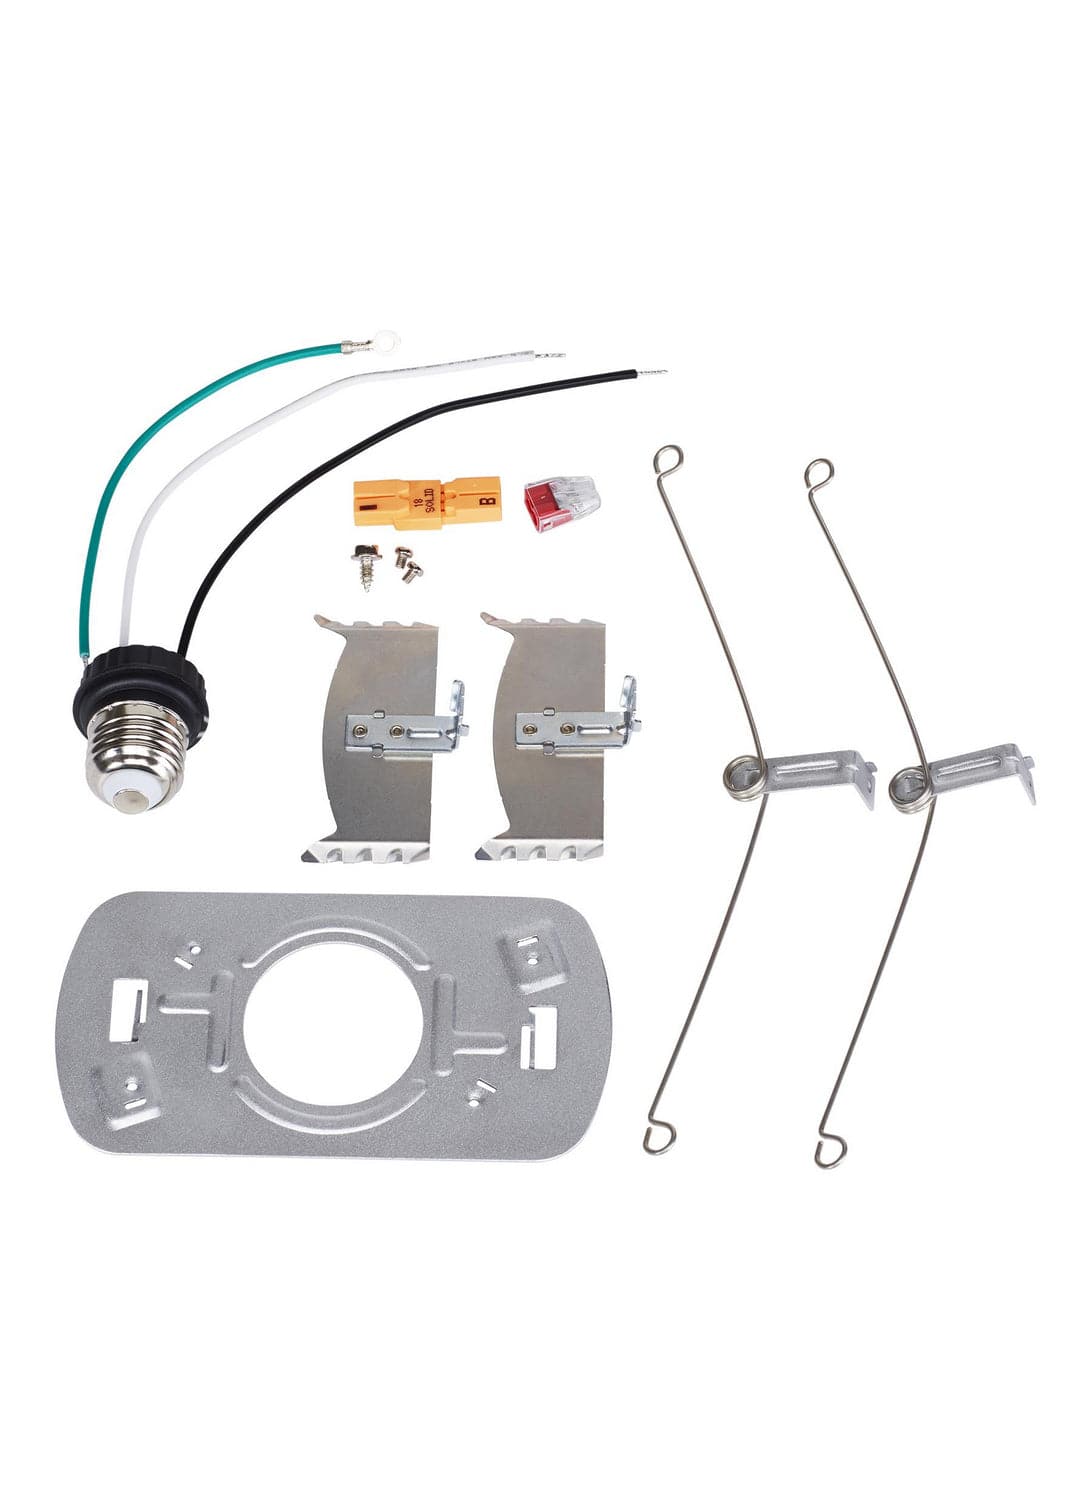 Generation Lighting. - 14795 - Retrofit Kit - Connectors and Accessories - Undefined